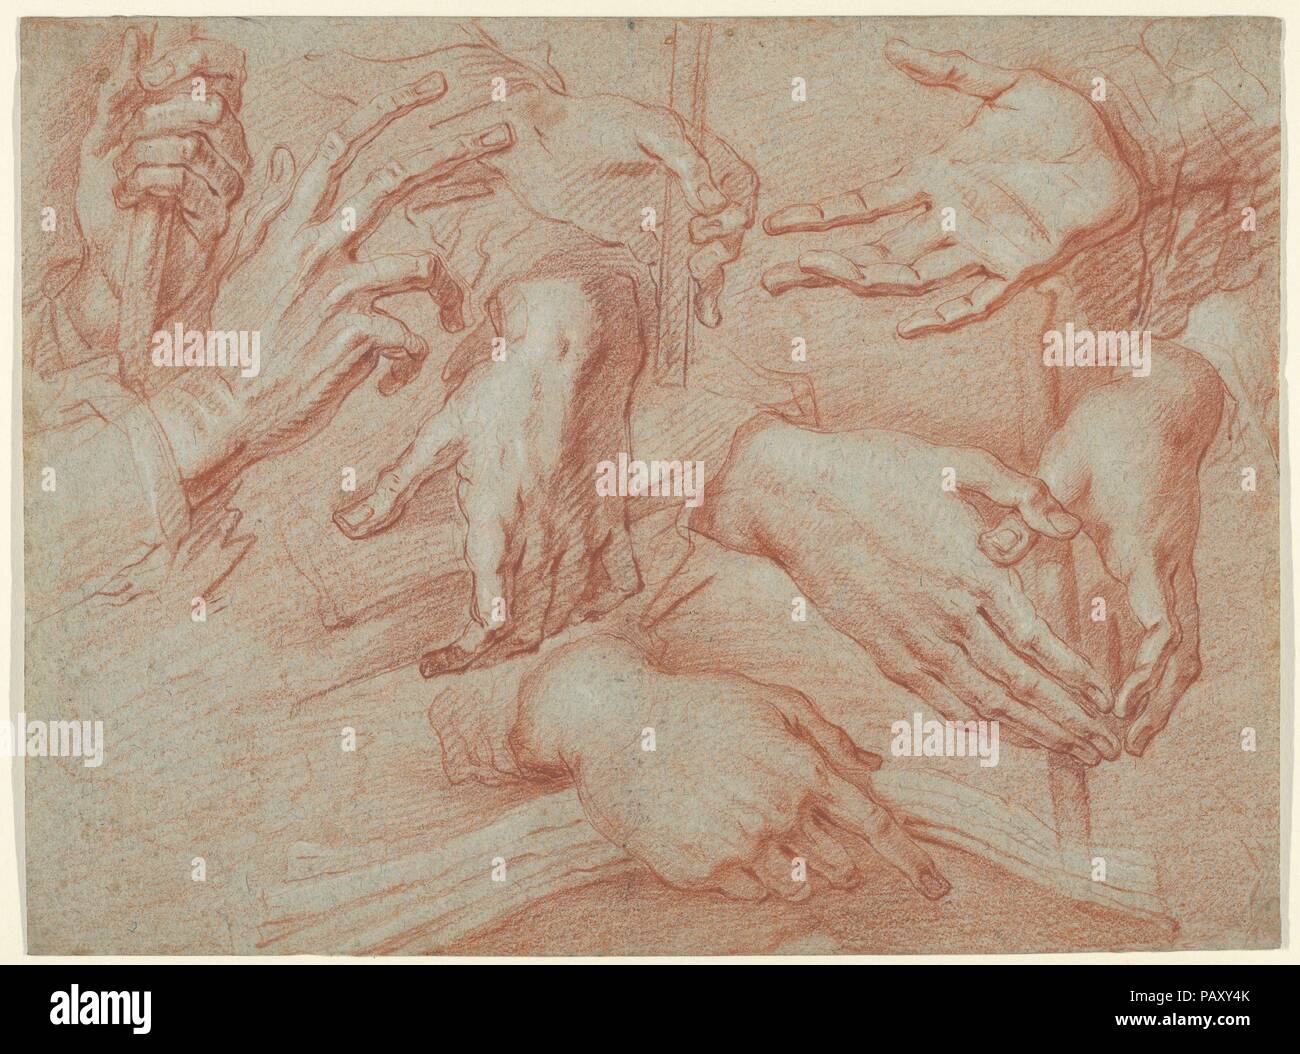 Study of Hands (recto); Study for a Reclining St. Francis (verso). Artist: Daniele Crespi (Italian, Busto Arsizio 1597/1600-1630 Milan). Dimensions: Sheet: 8 1/8 in. × 11 in. (20.7 × 28 cm). Date: ca. 1628-30.  This powerful study of hands, drawn after a live model, was used by Crespi for several of his fresco portraits of Carthusian monks at the Chartreuse of Garegnano, in the outskirts of Milan. Repertory drawings such as this one that could be referenced in the making of several figures helped the artist complete the large frescoes in a short amount of time, between 1628 and 1630. The decor Stock Photo